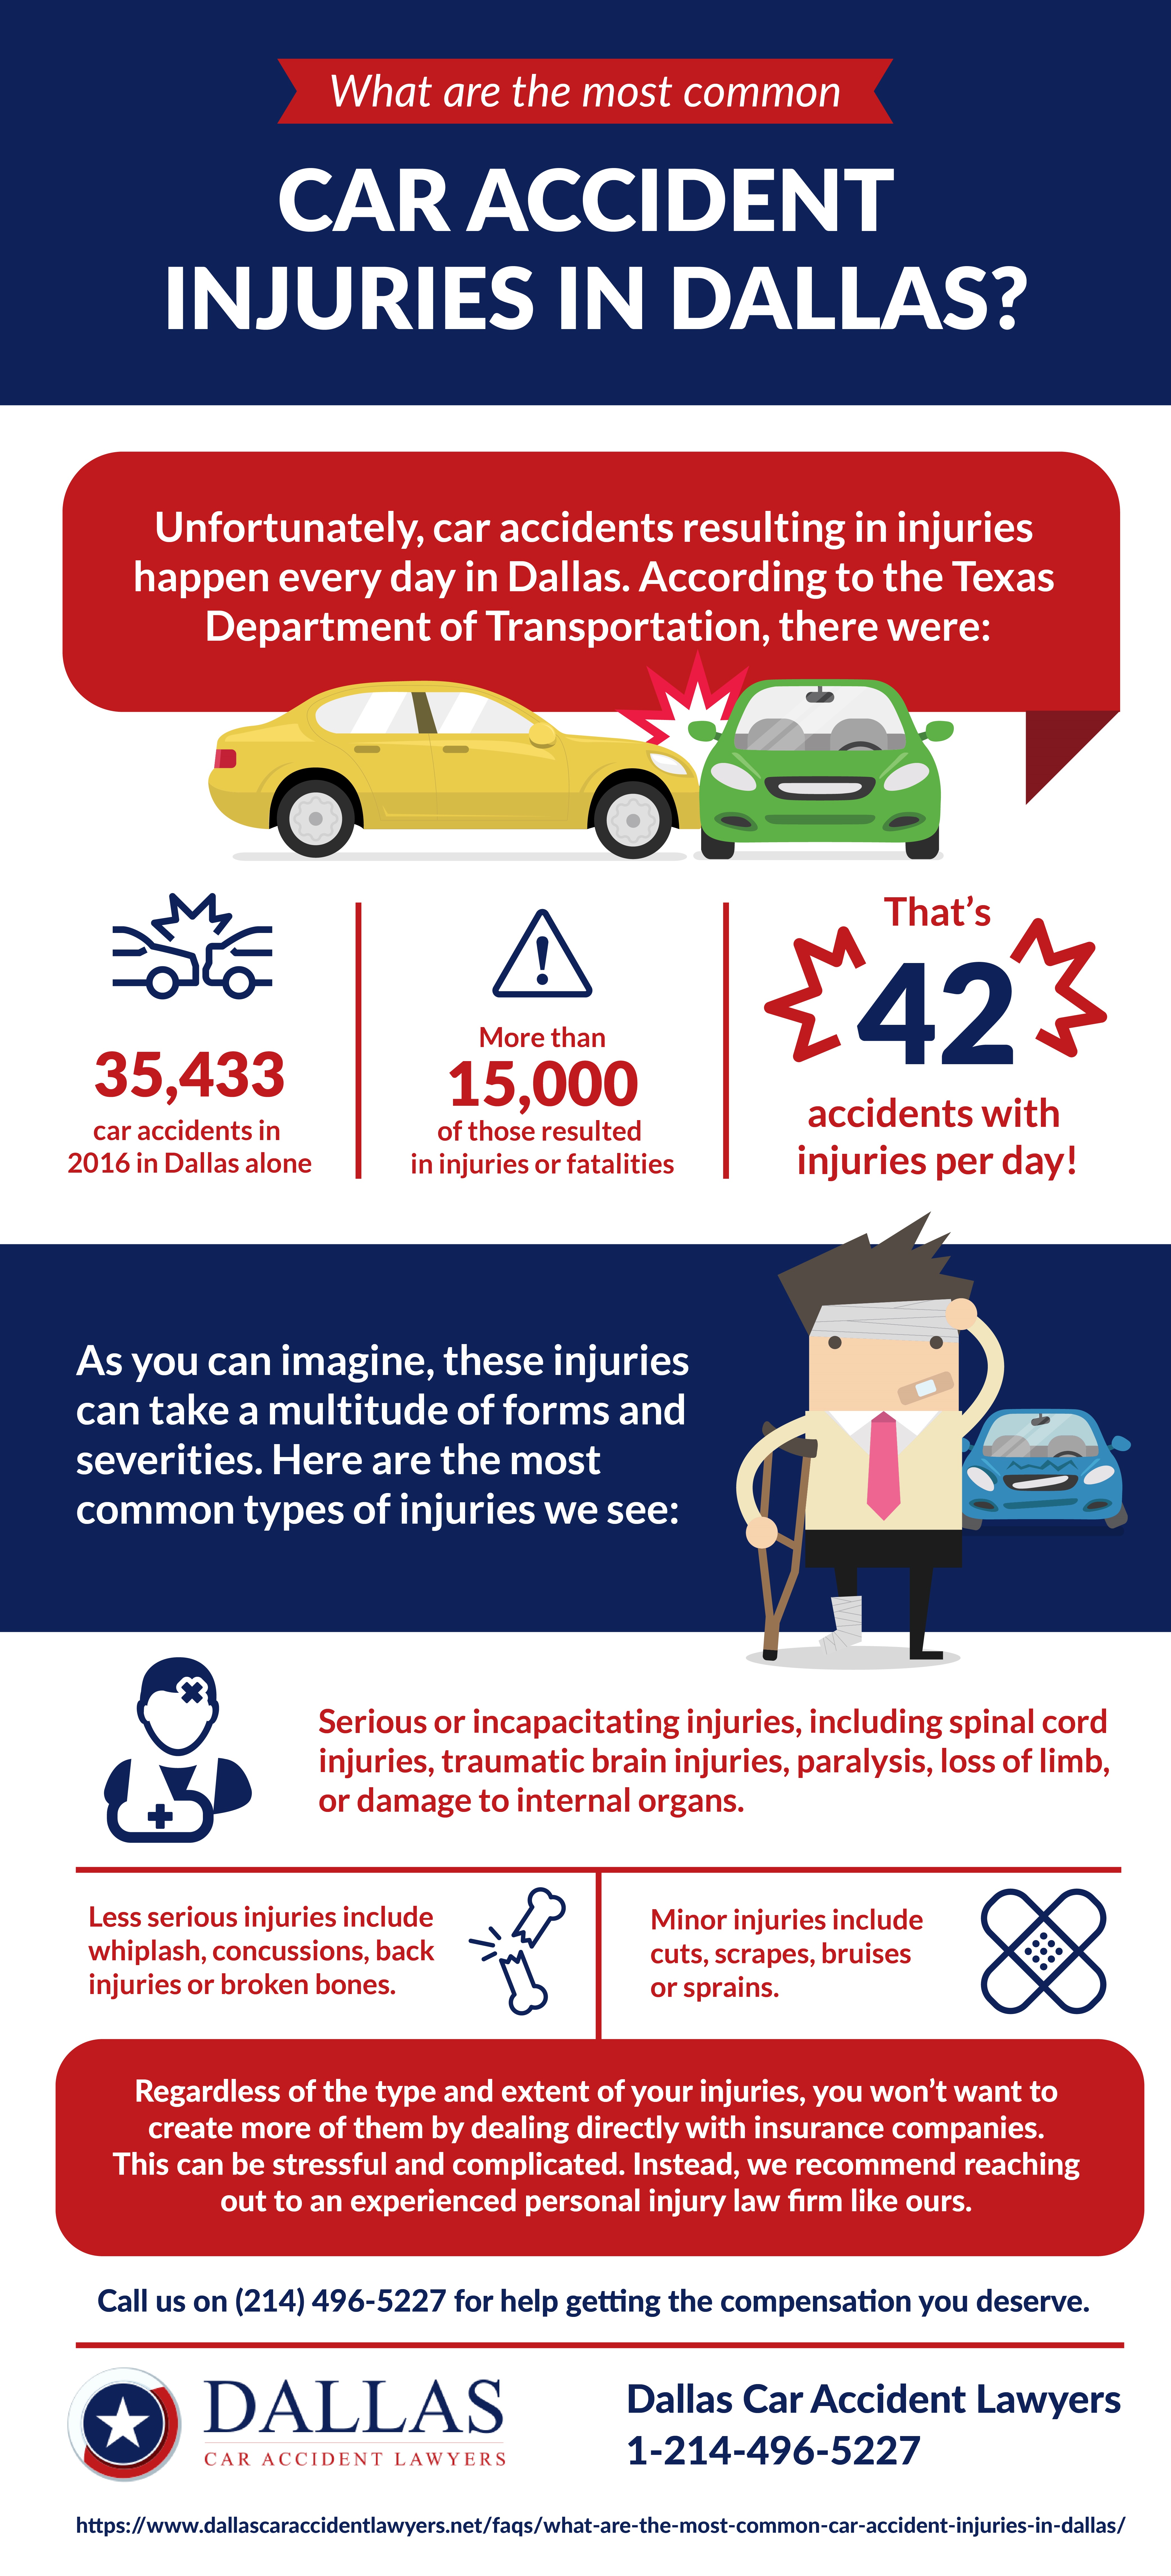 What Are The Most Common Car Accident Injuries in Dallas?